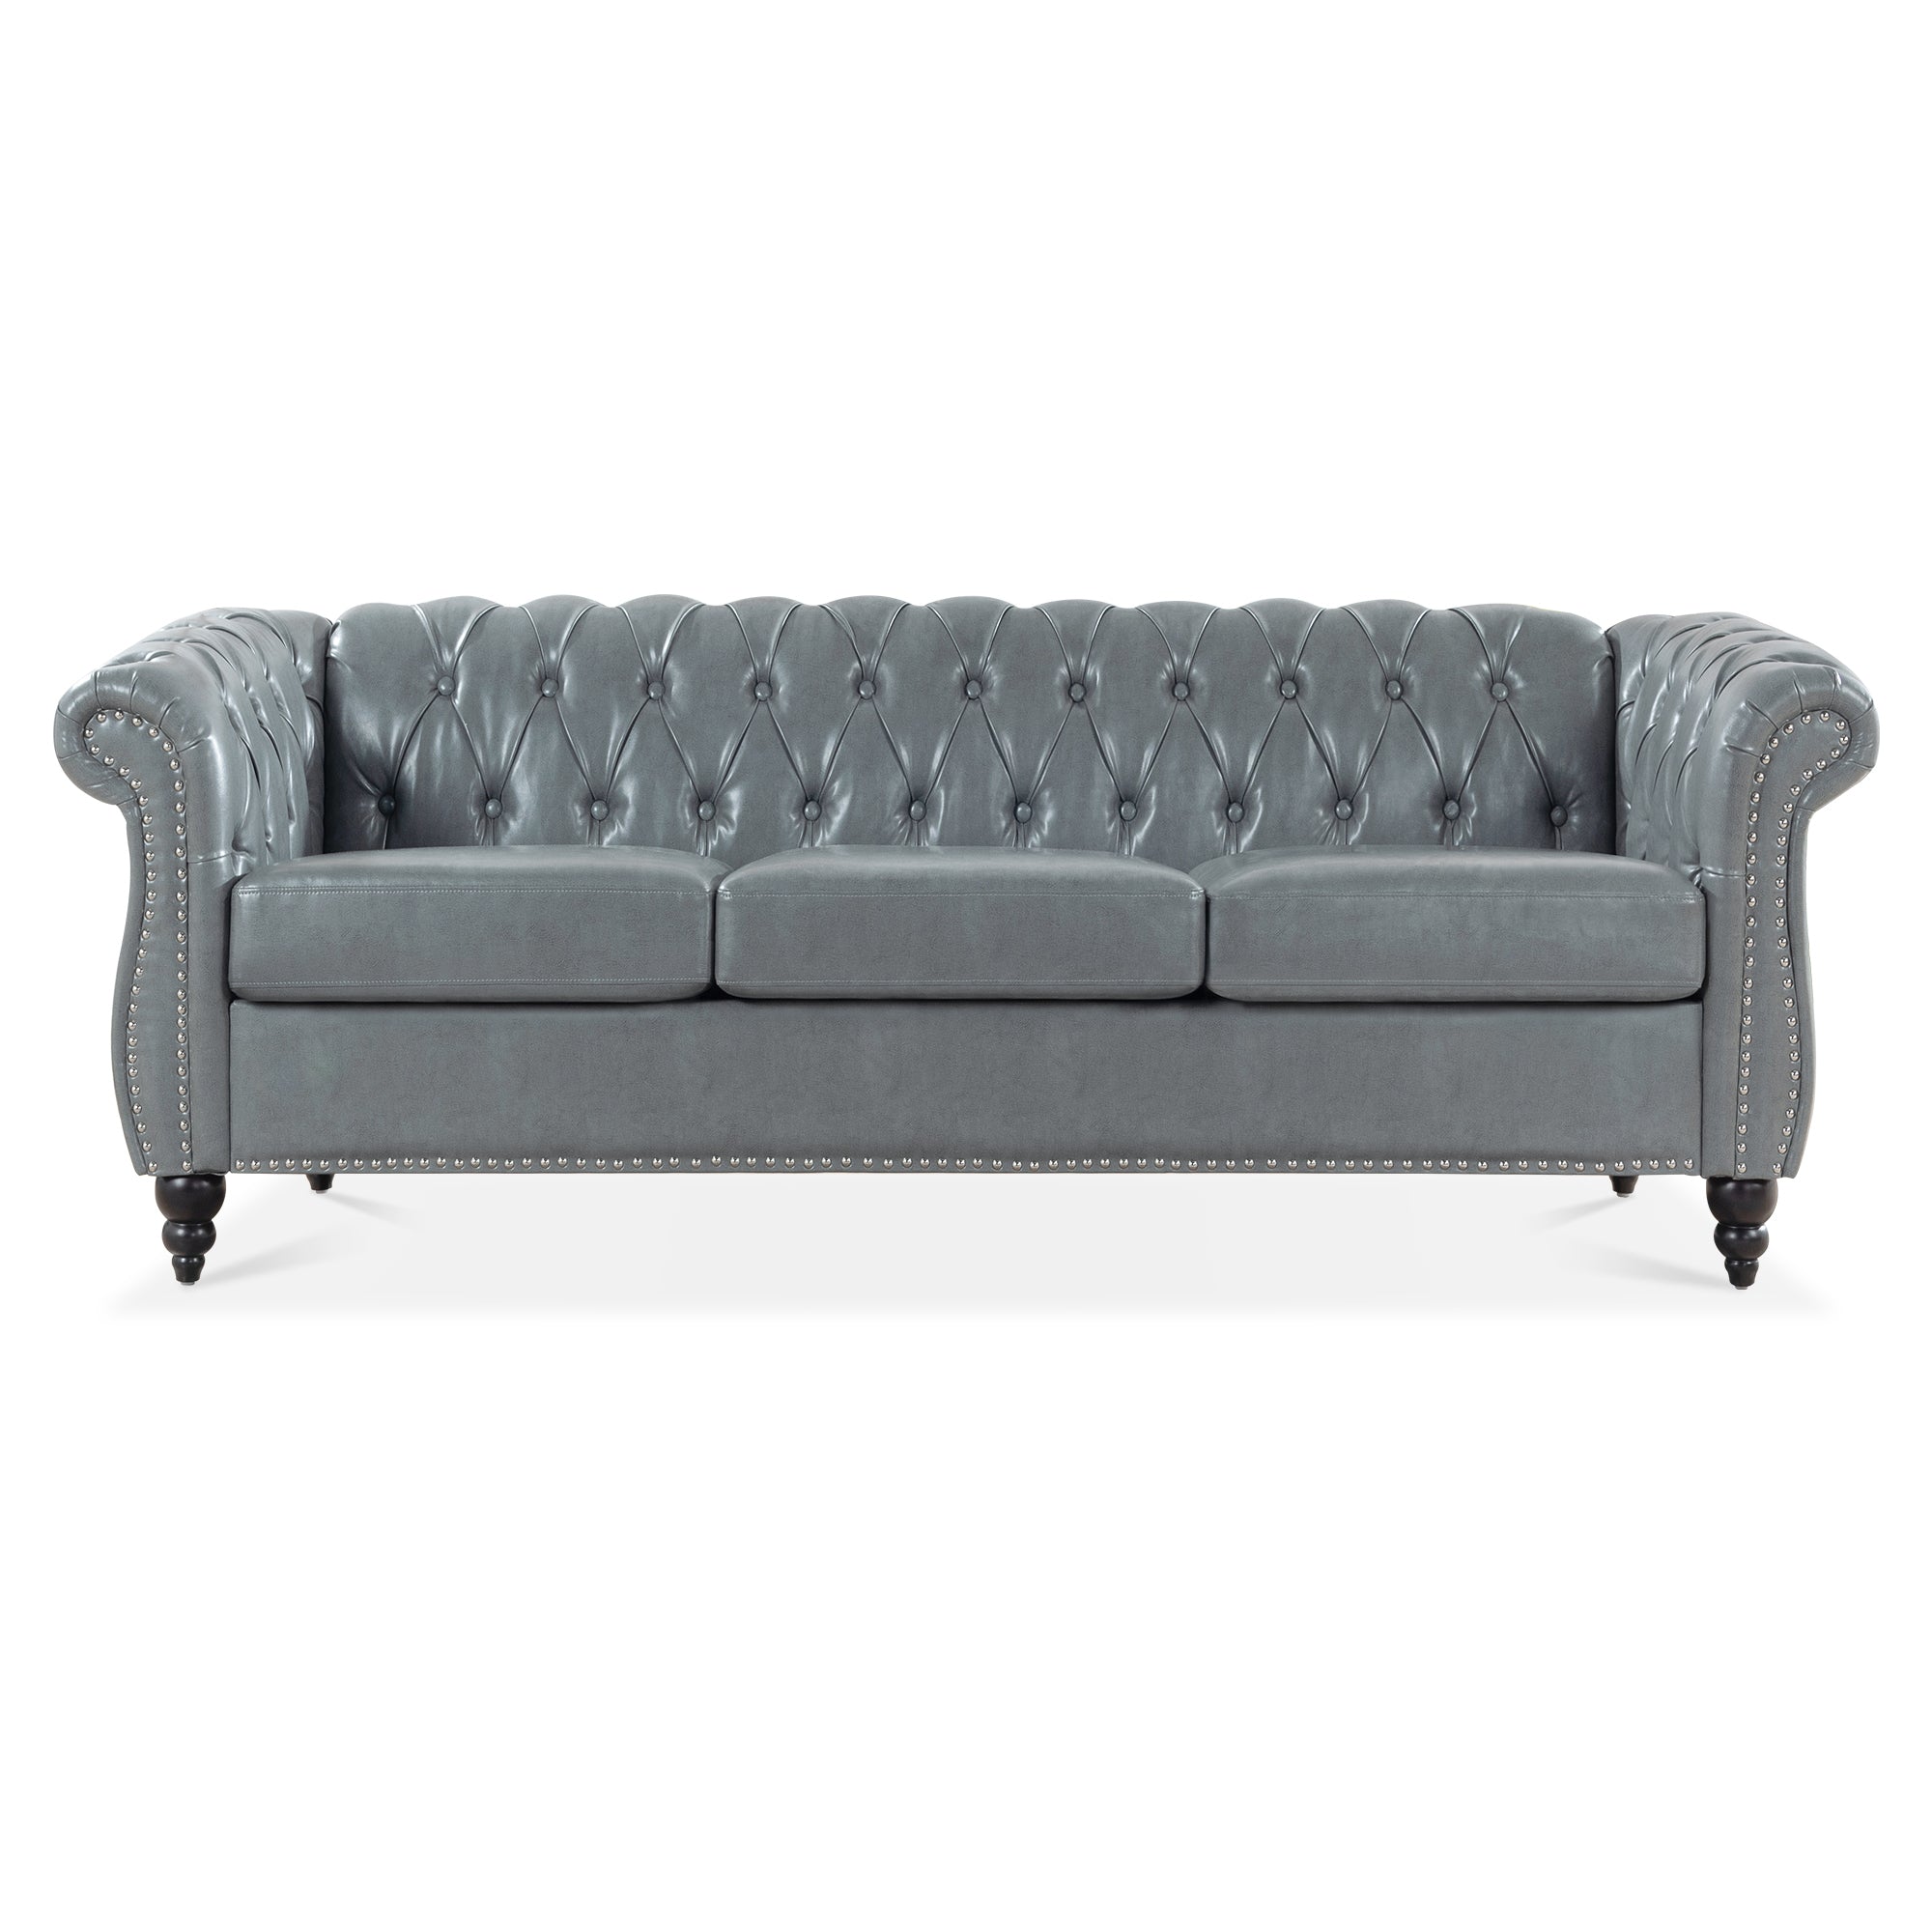 84" Gray Faux Leather Chesterfield Sofa With Nailhead Trim